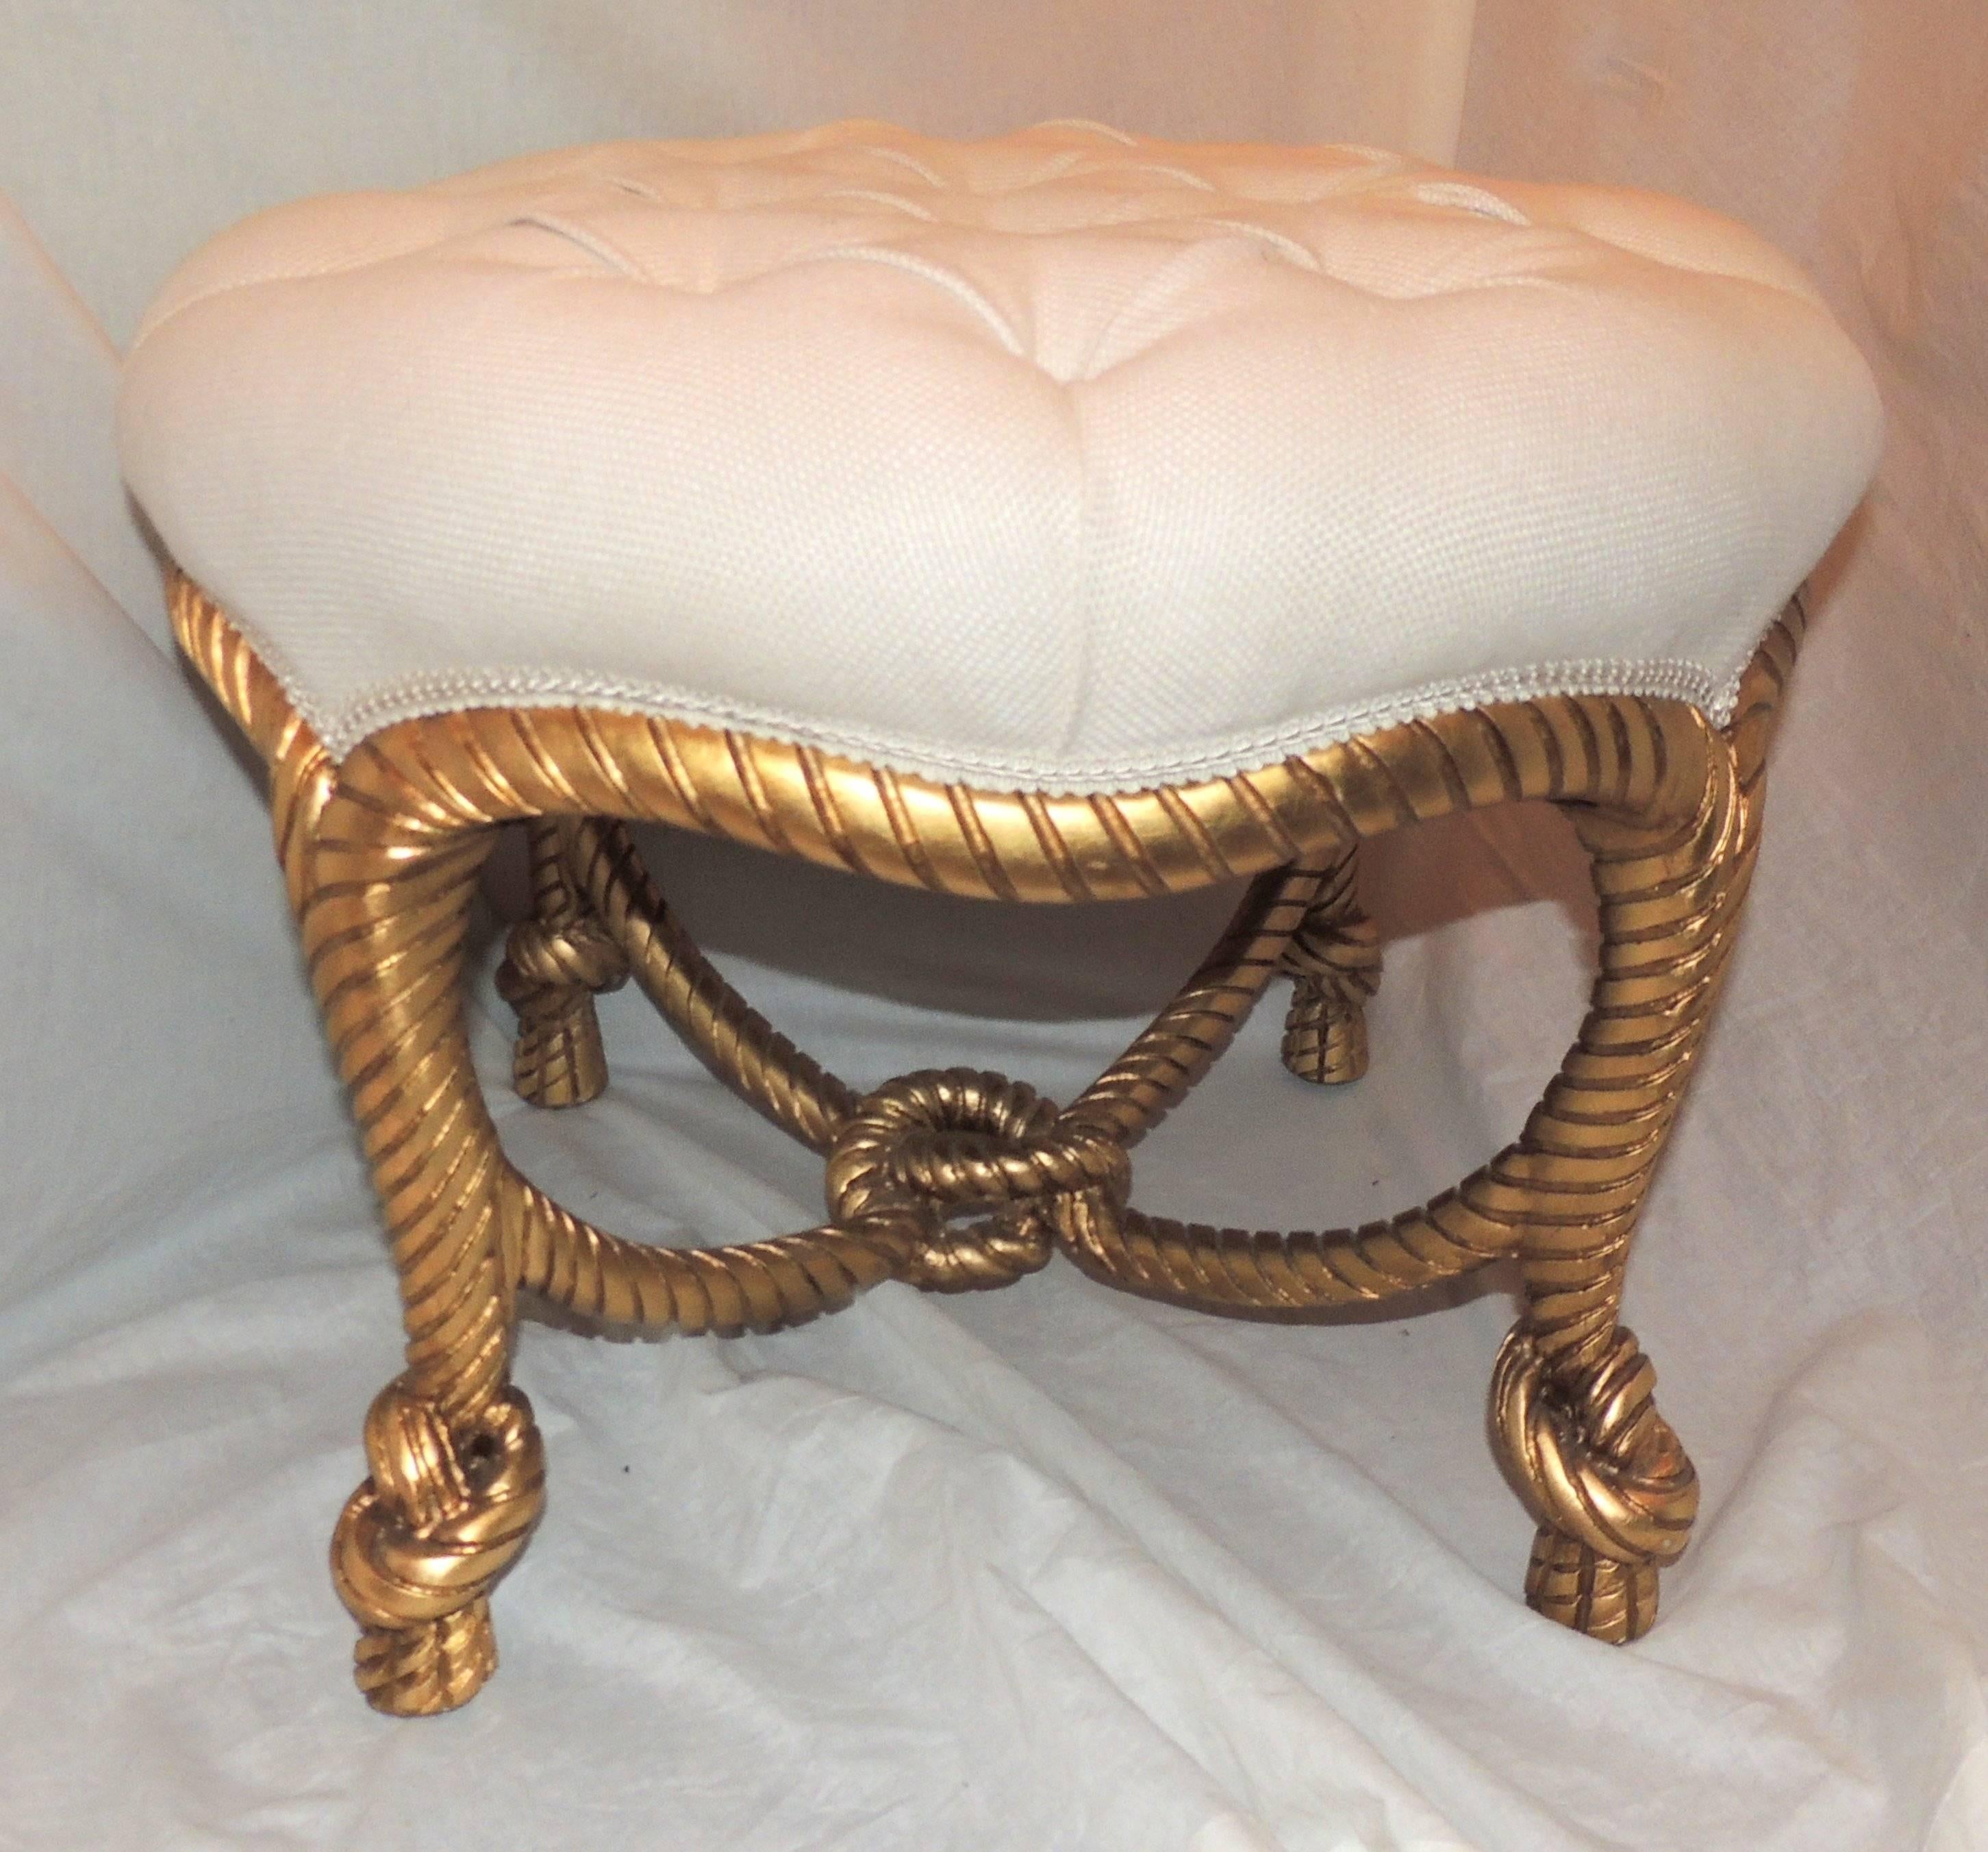 A Wonderful gilt wood Rope & Tassel bow ottoman Tufted round bench stool.
Recent Upholstery

Measures: 24